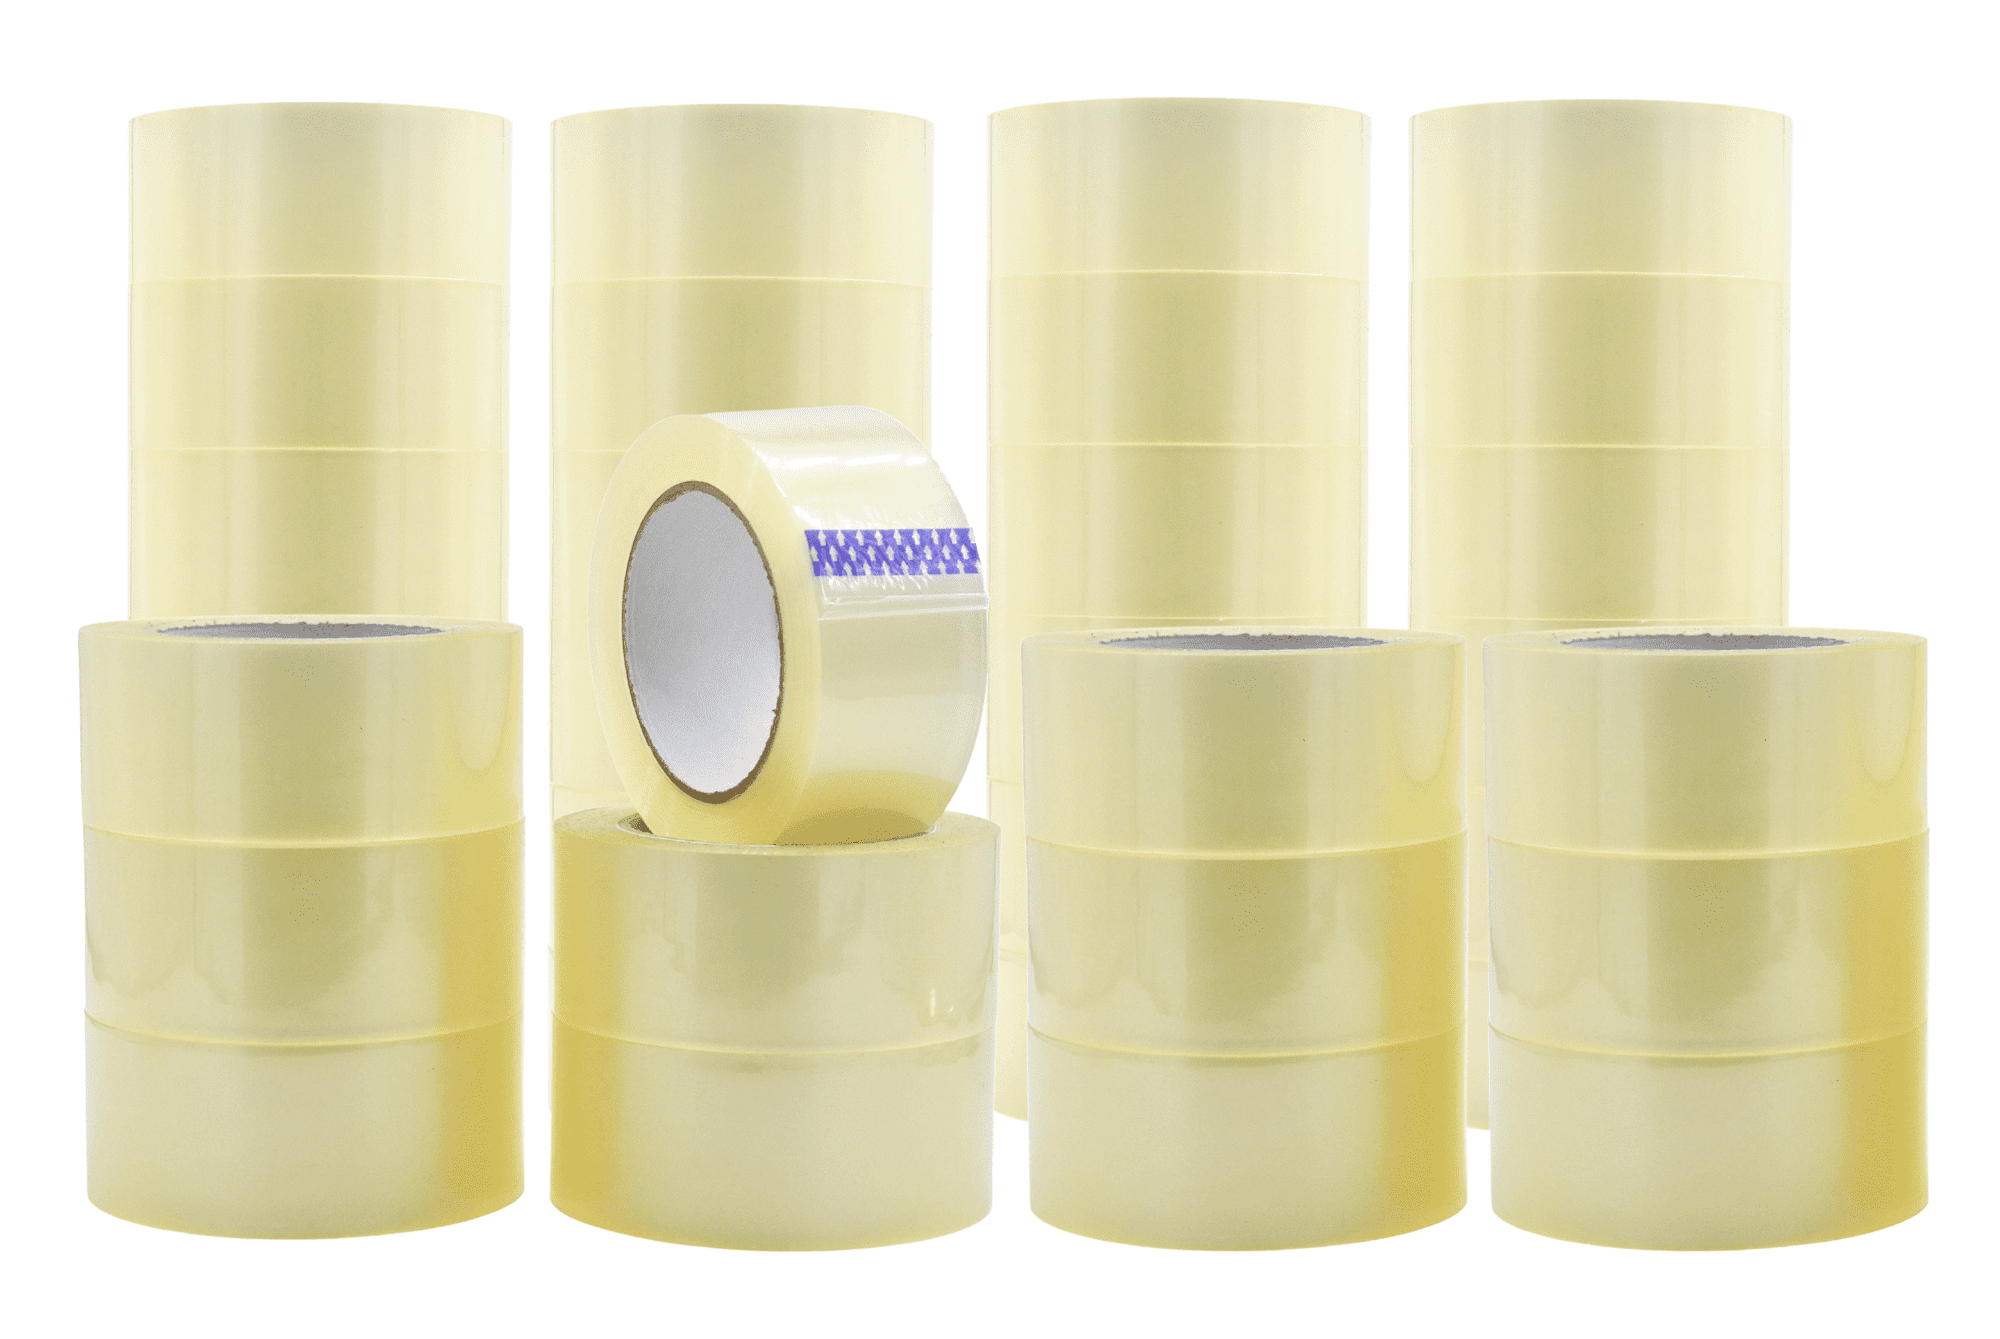 FOUR 3 Rolls Official   Packing Tape 2" By 75yds New   #1 